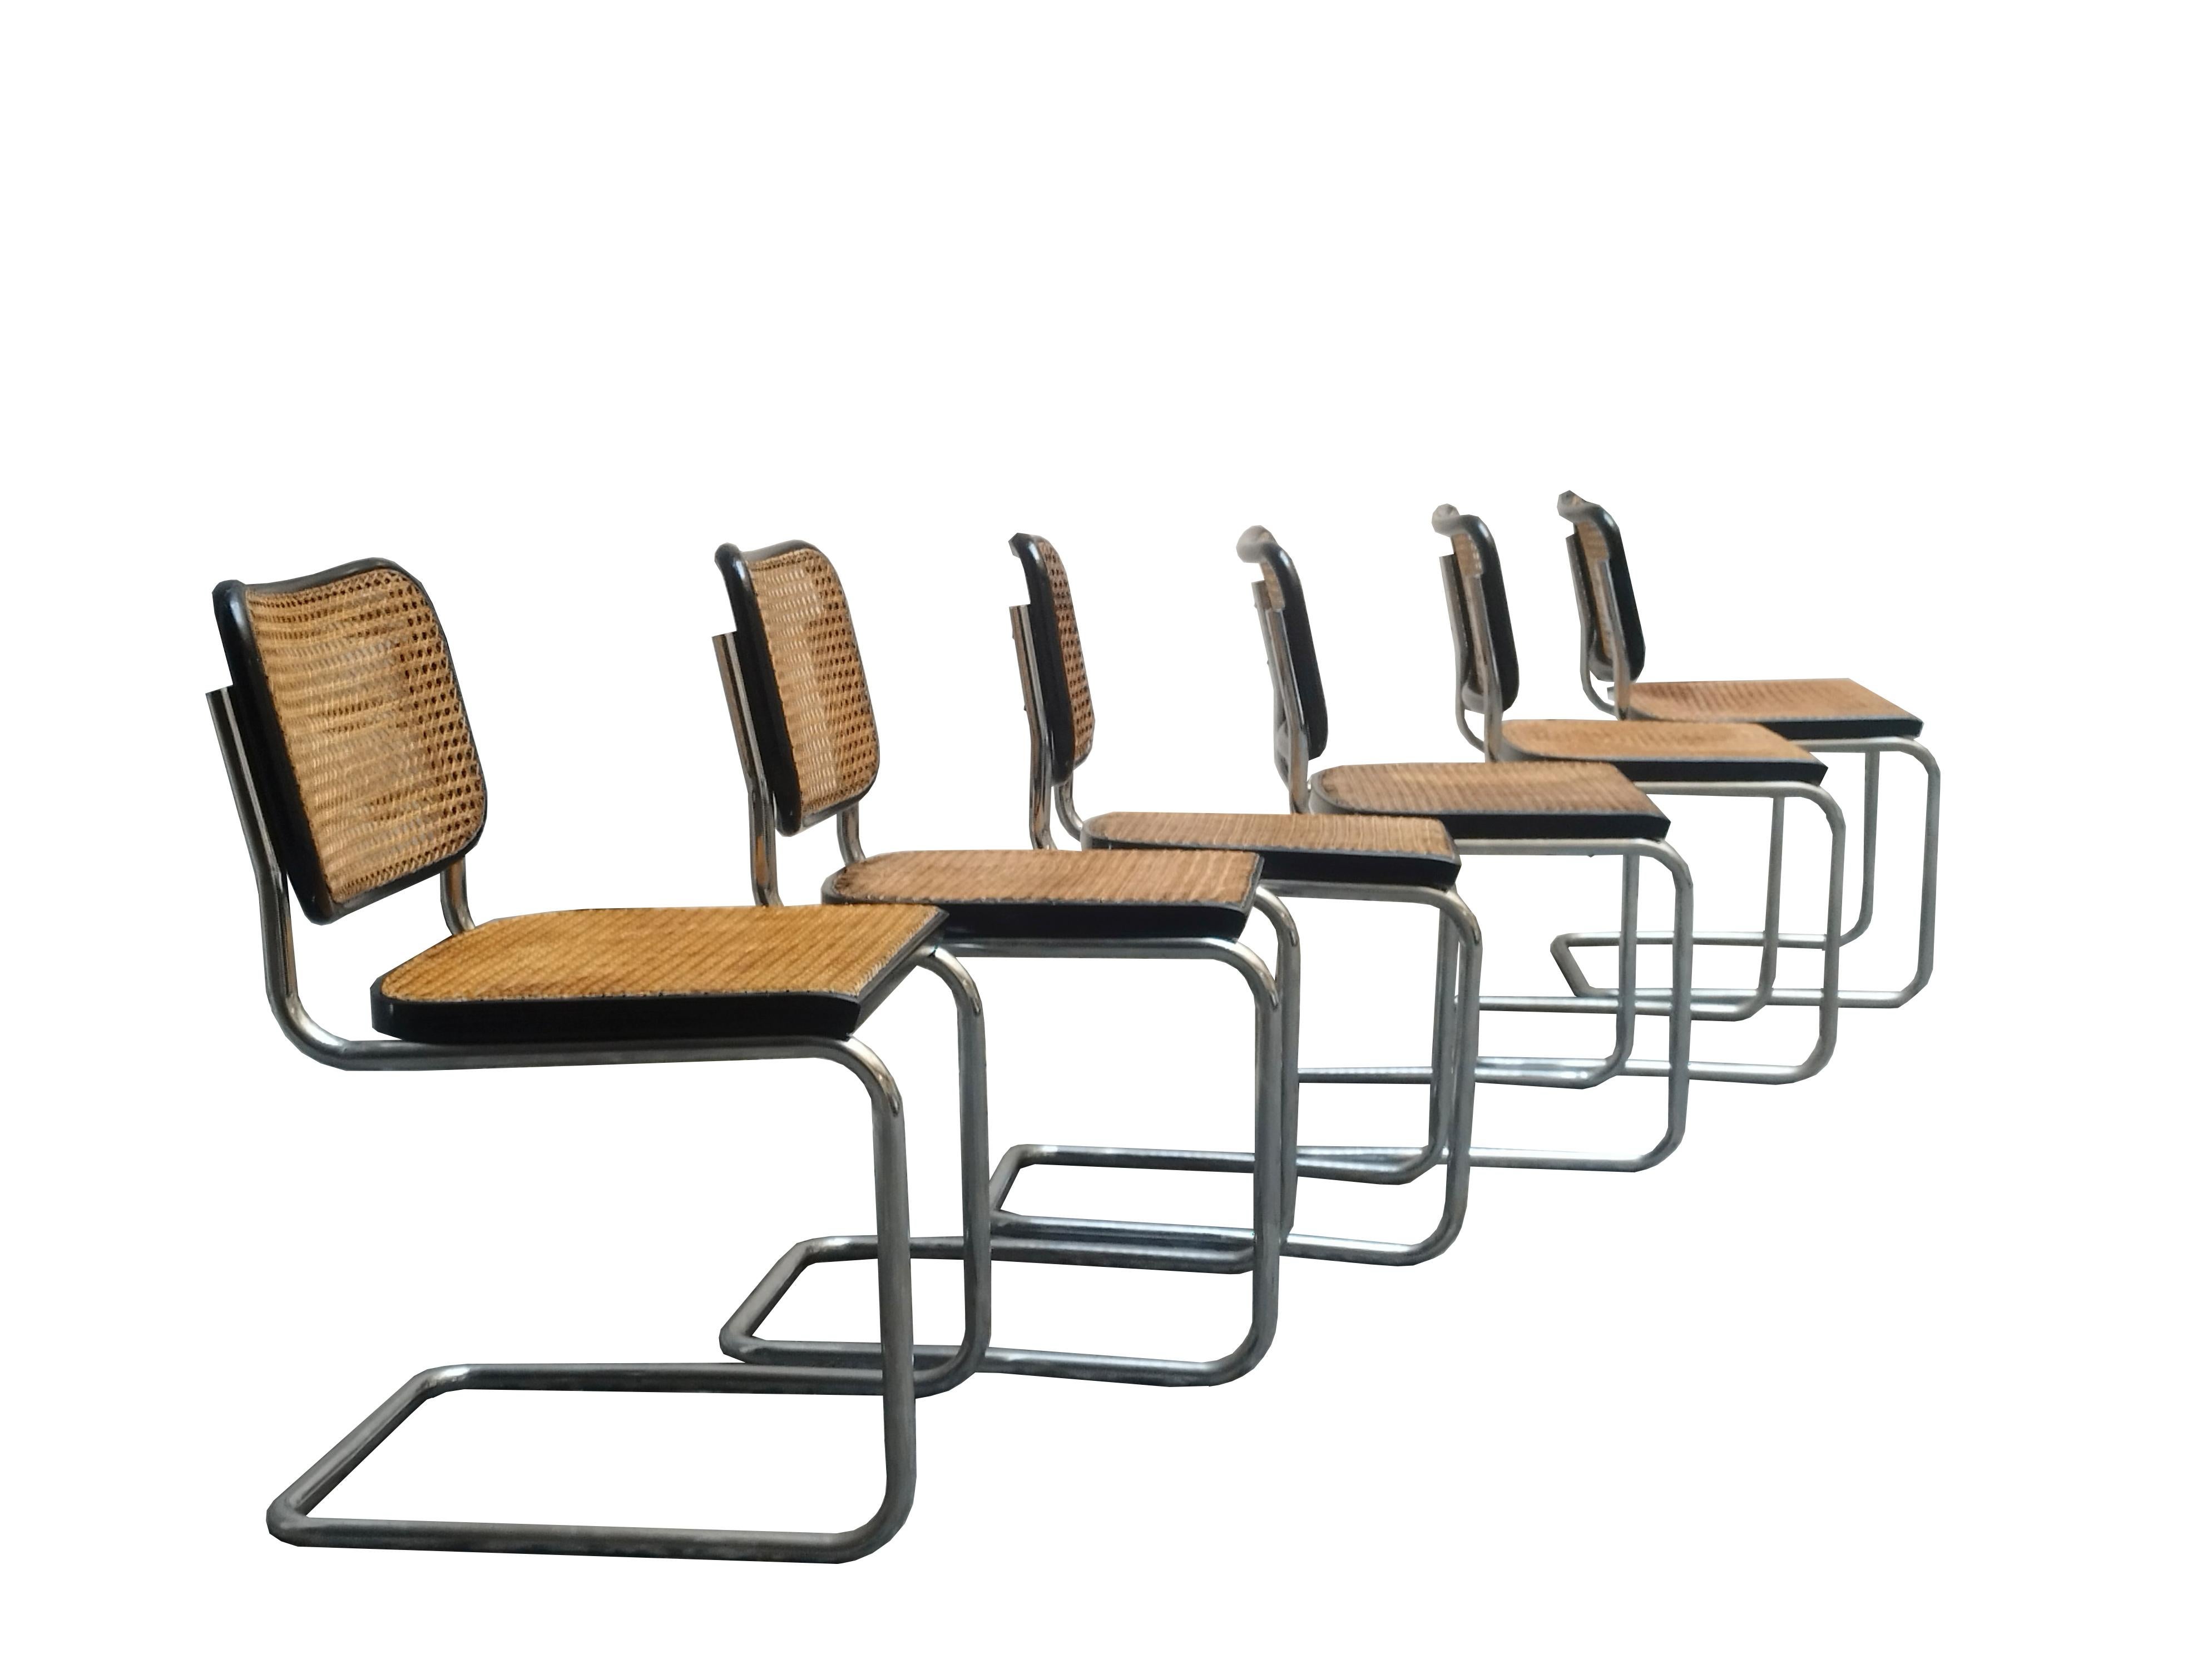 Set of 6 Cesca chairs designed by Marcel Breuer, produced by Gavina in 1960.
The chairs show slight signs of wear, the seats are original Vienna straw.
The combination of Vienna straw and tubular metal, tradition and innovation, Thonet and Bauhaus,